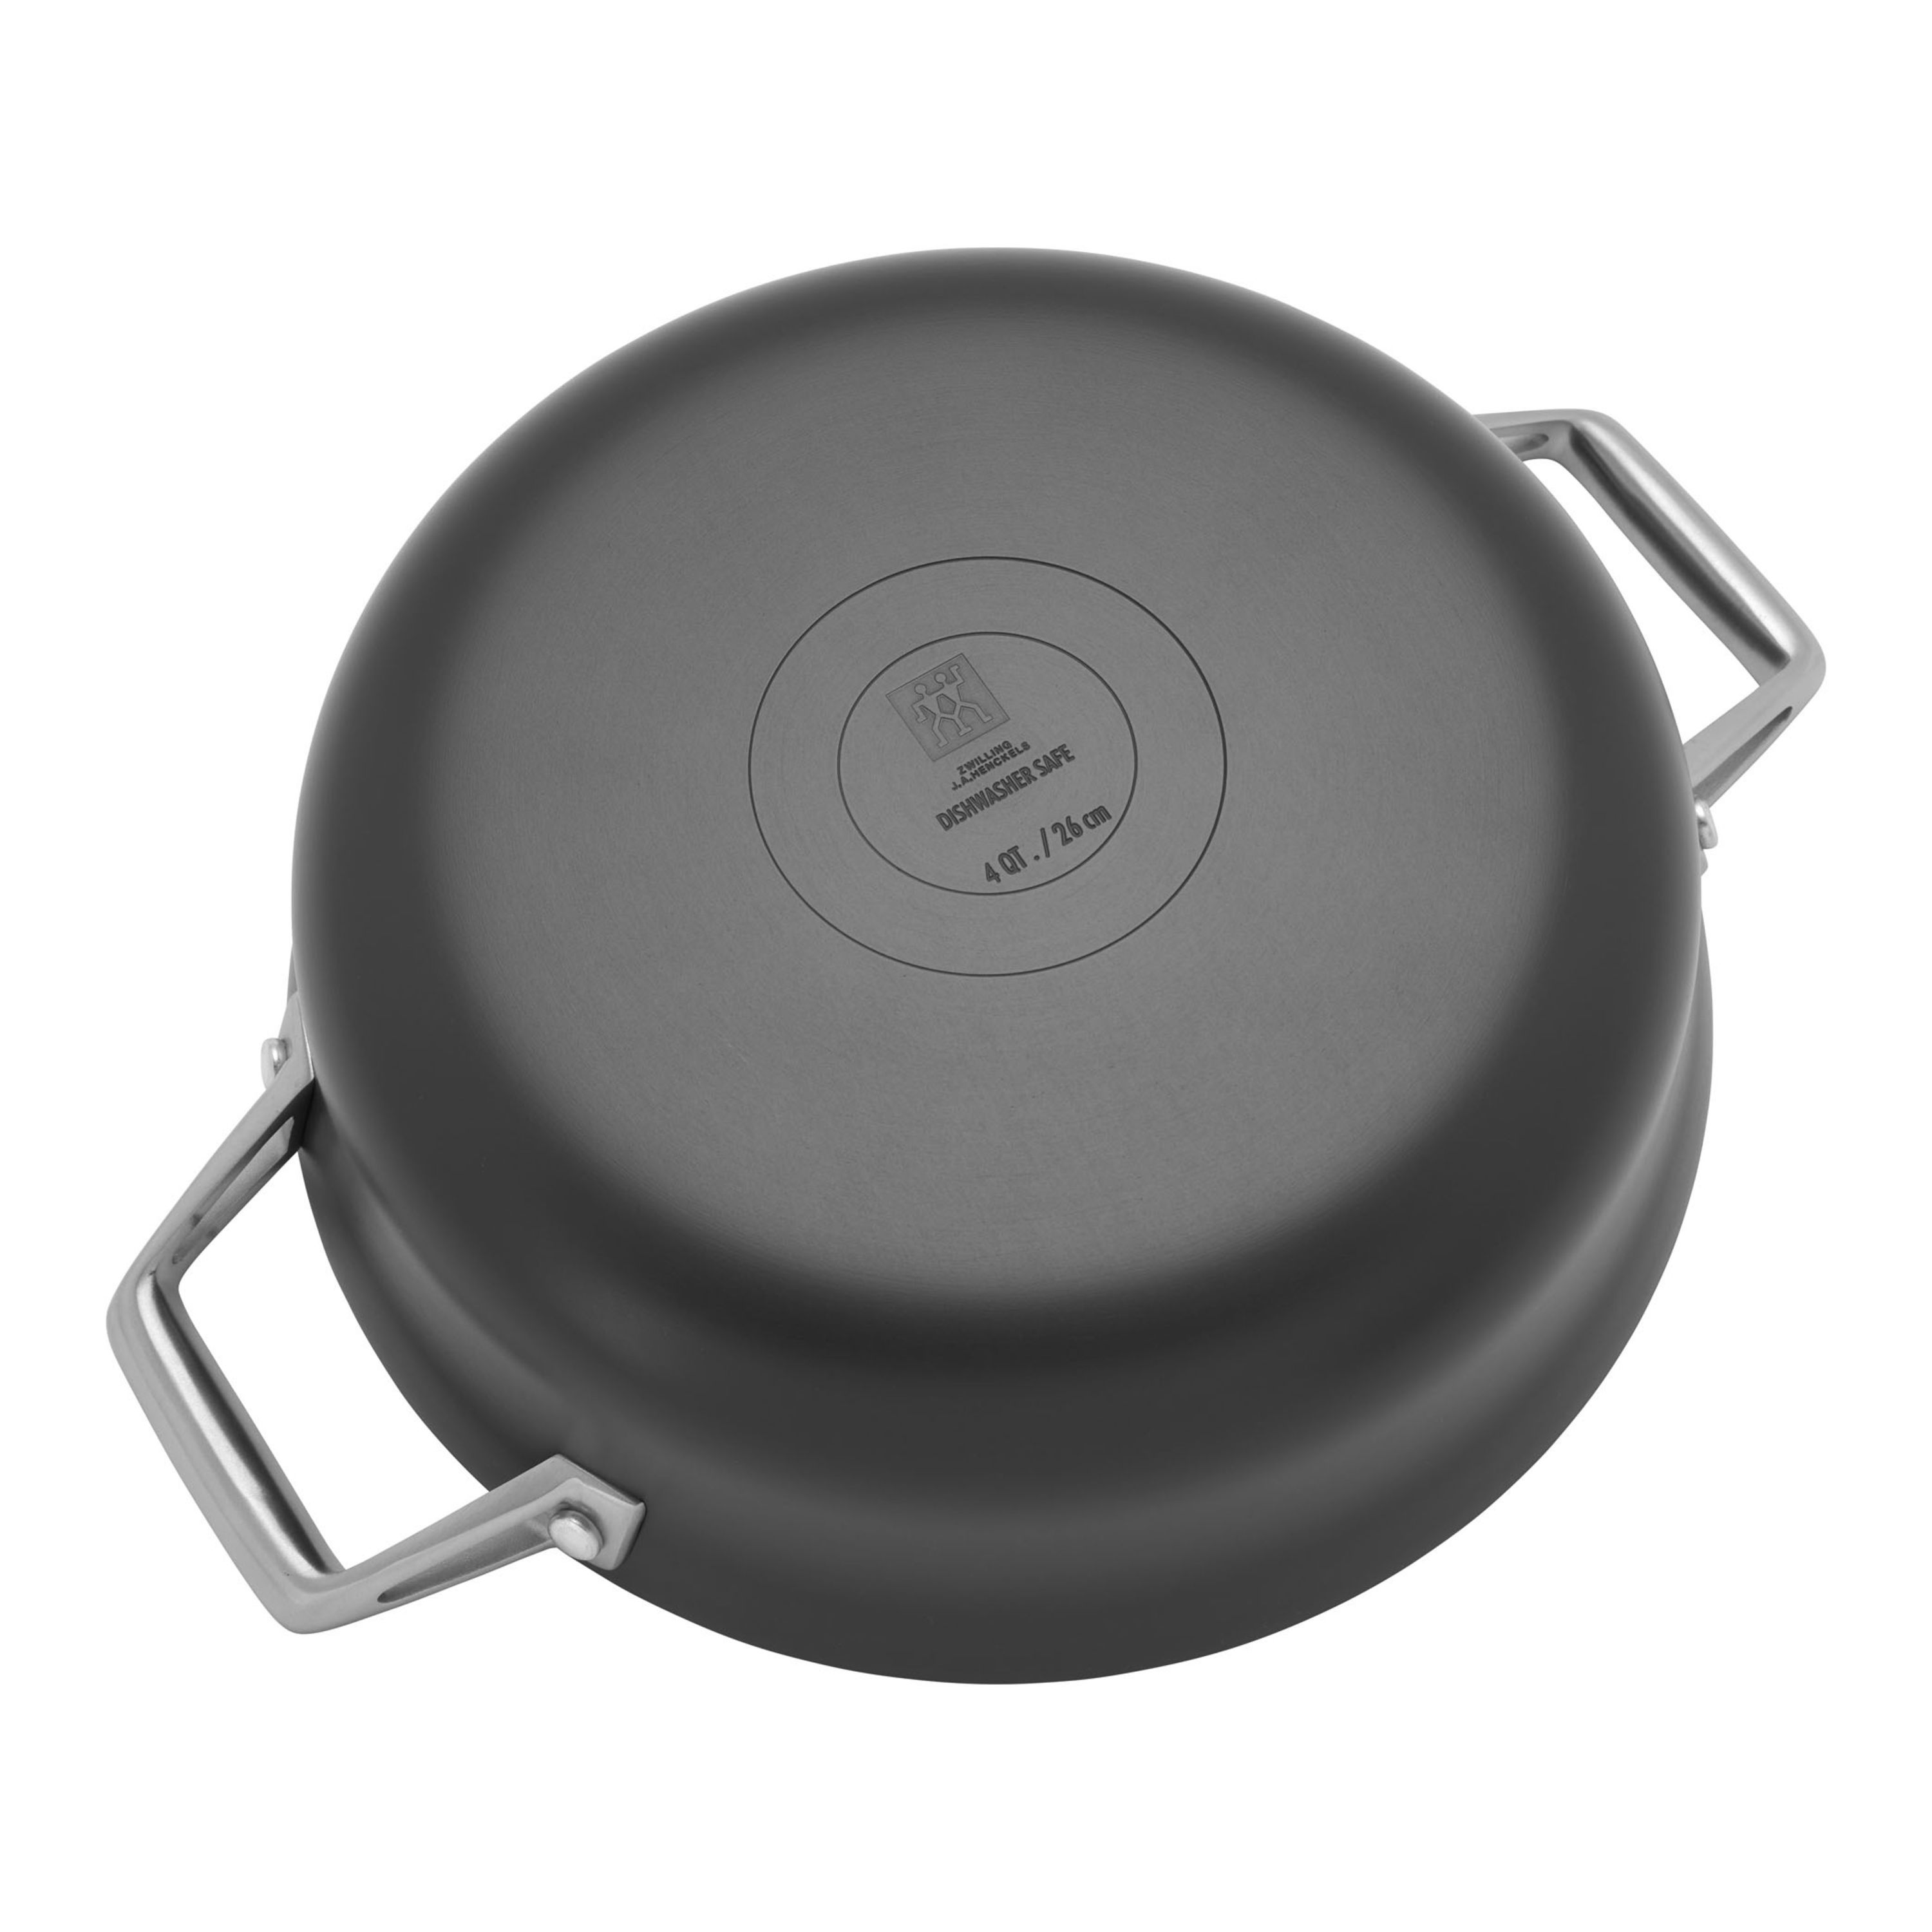 ZWILLING Motion 3-Qt. Non-Stick Hard-Anodized Saute Pan with Lid + Reviews